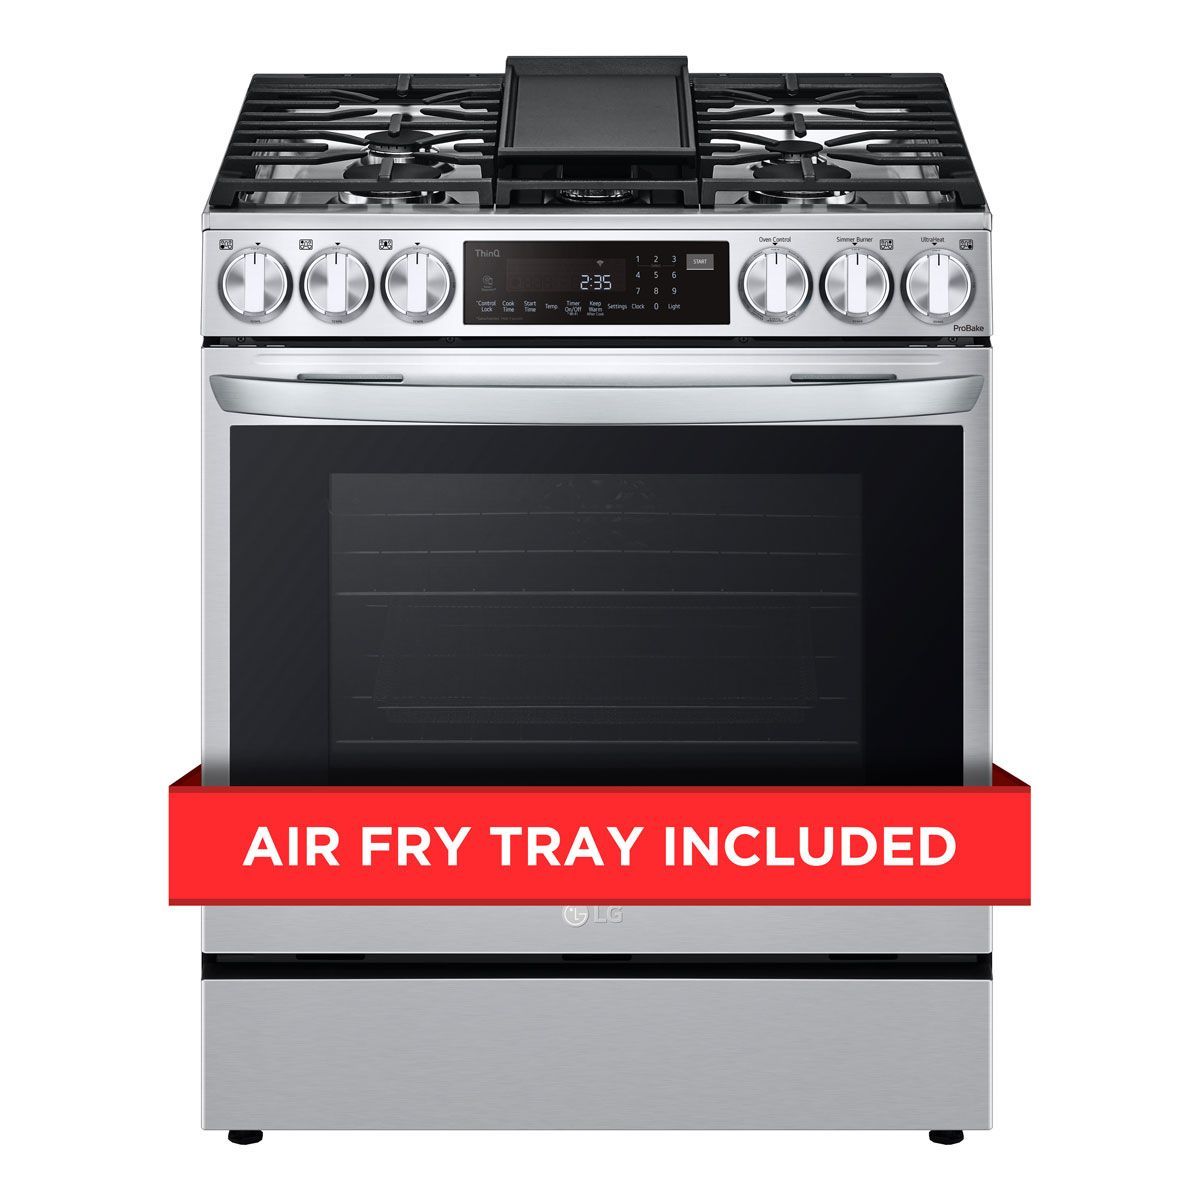 Picture of LG 6.3 cu. ft. Slide-In Gas Range WiFi Enabled w/ ProBake Convection - LSGL6335F